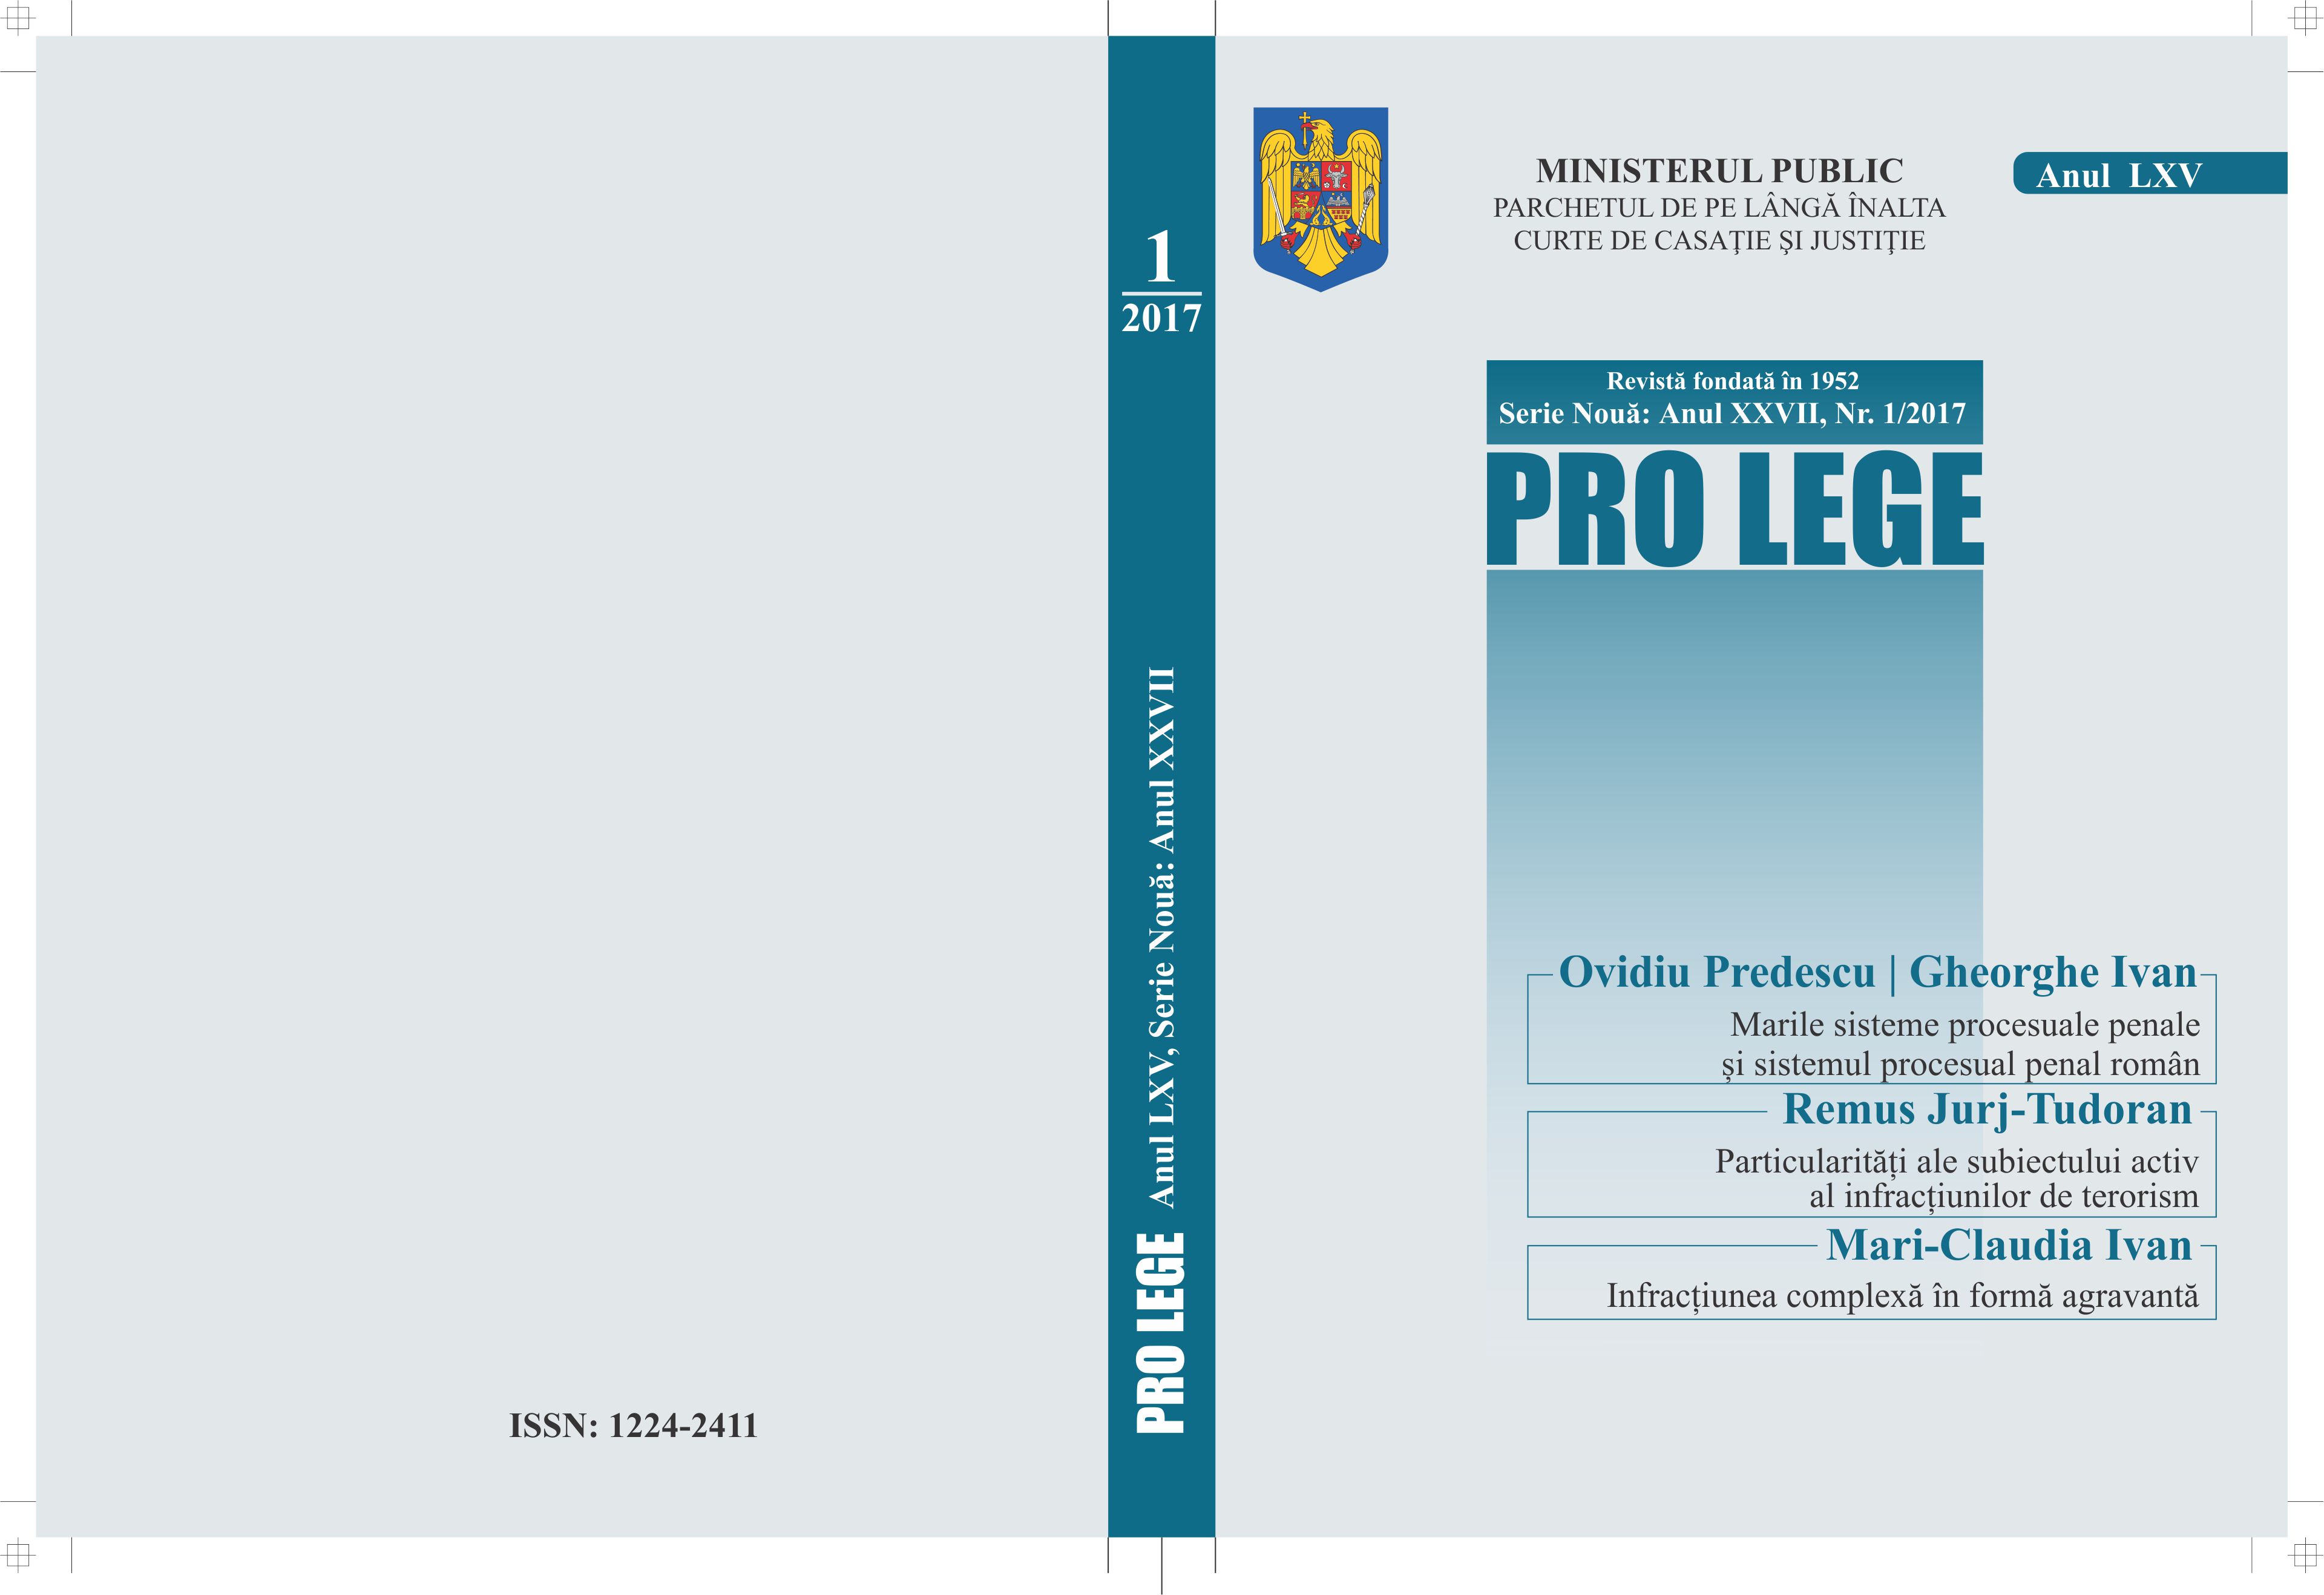 The appreciation of the problems from the perspective of the new procedural regulations Cover Image